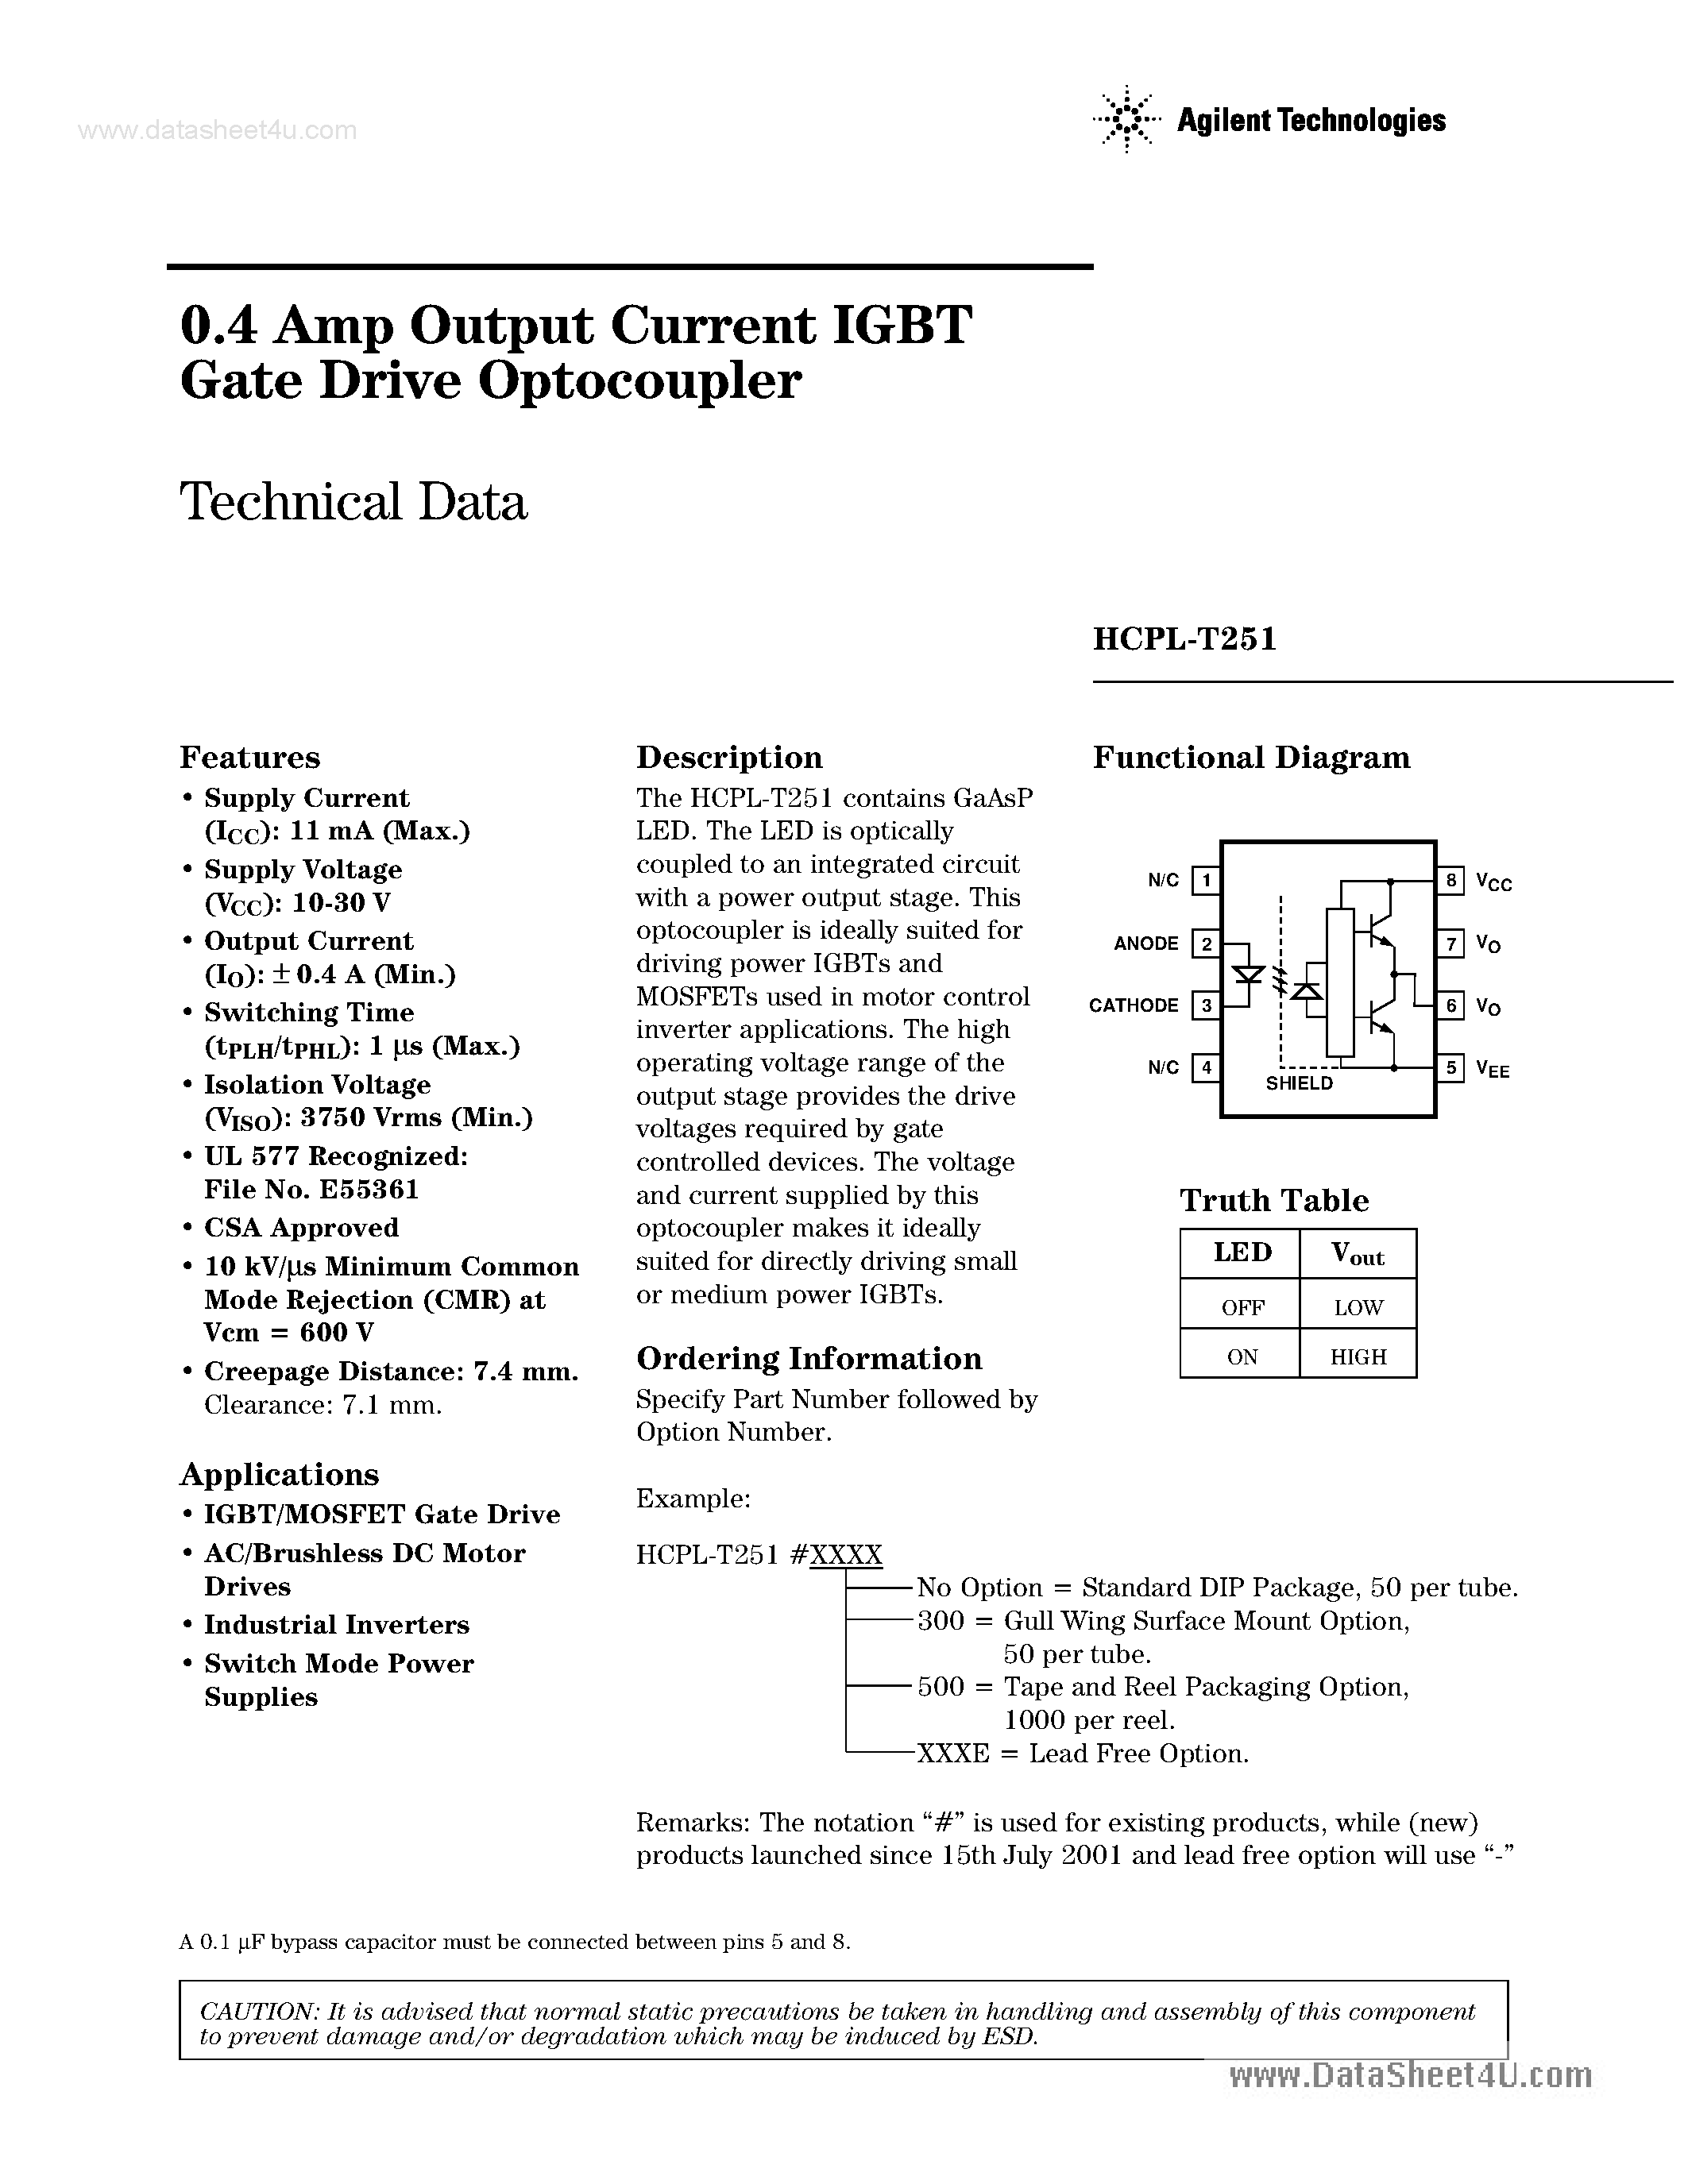 Datasheet HCPL-T251 - 0.4AMP OUTPUT CURRENT IGBT GATE DRIVE OPTOCOUPLER page 1